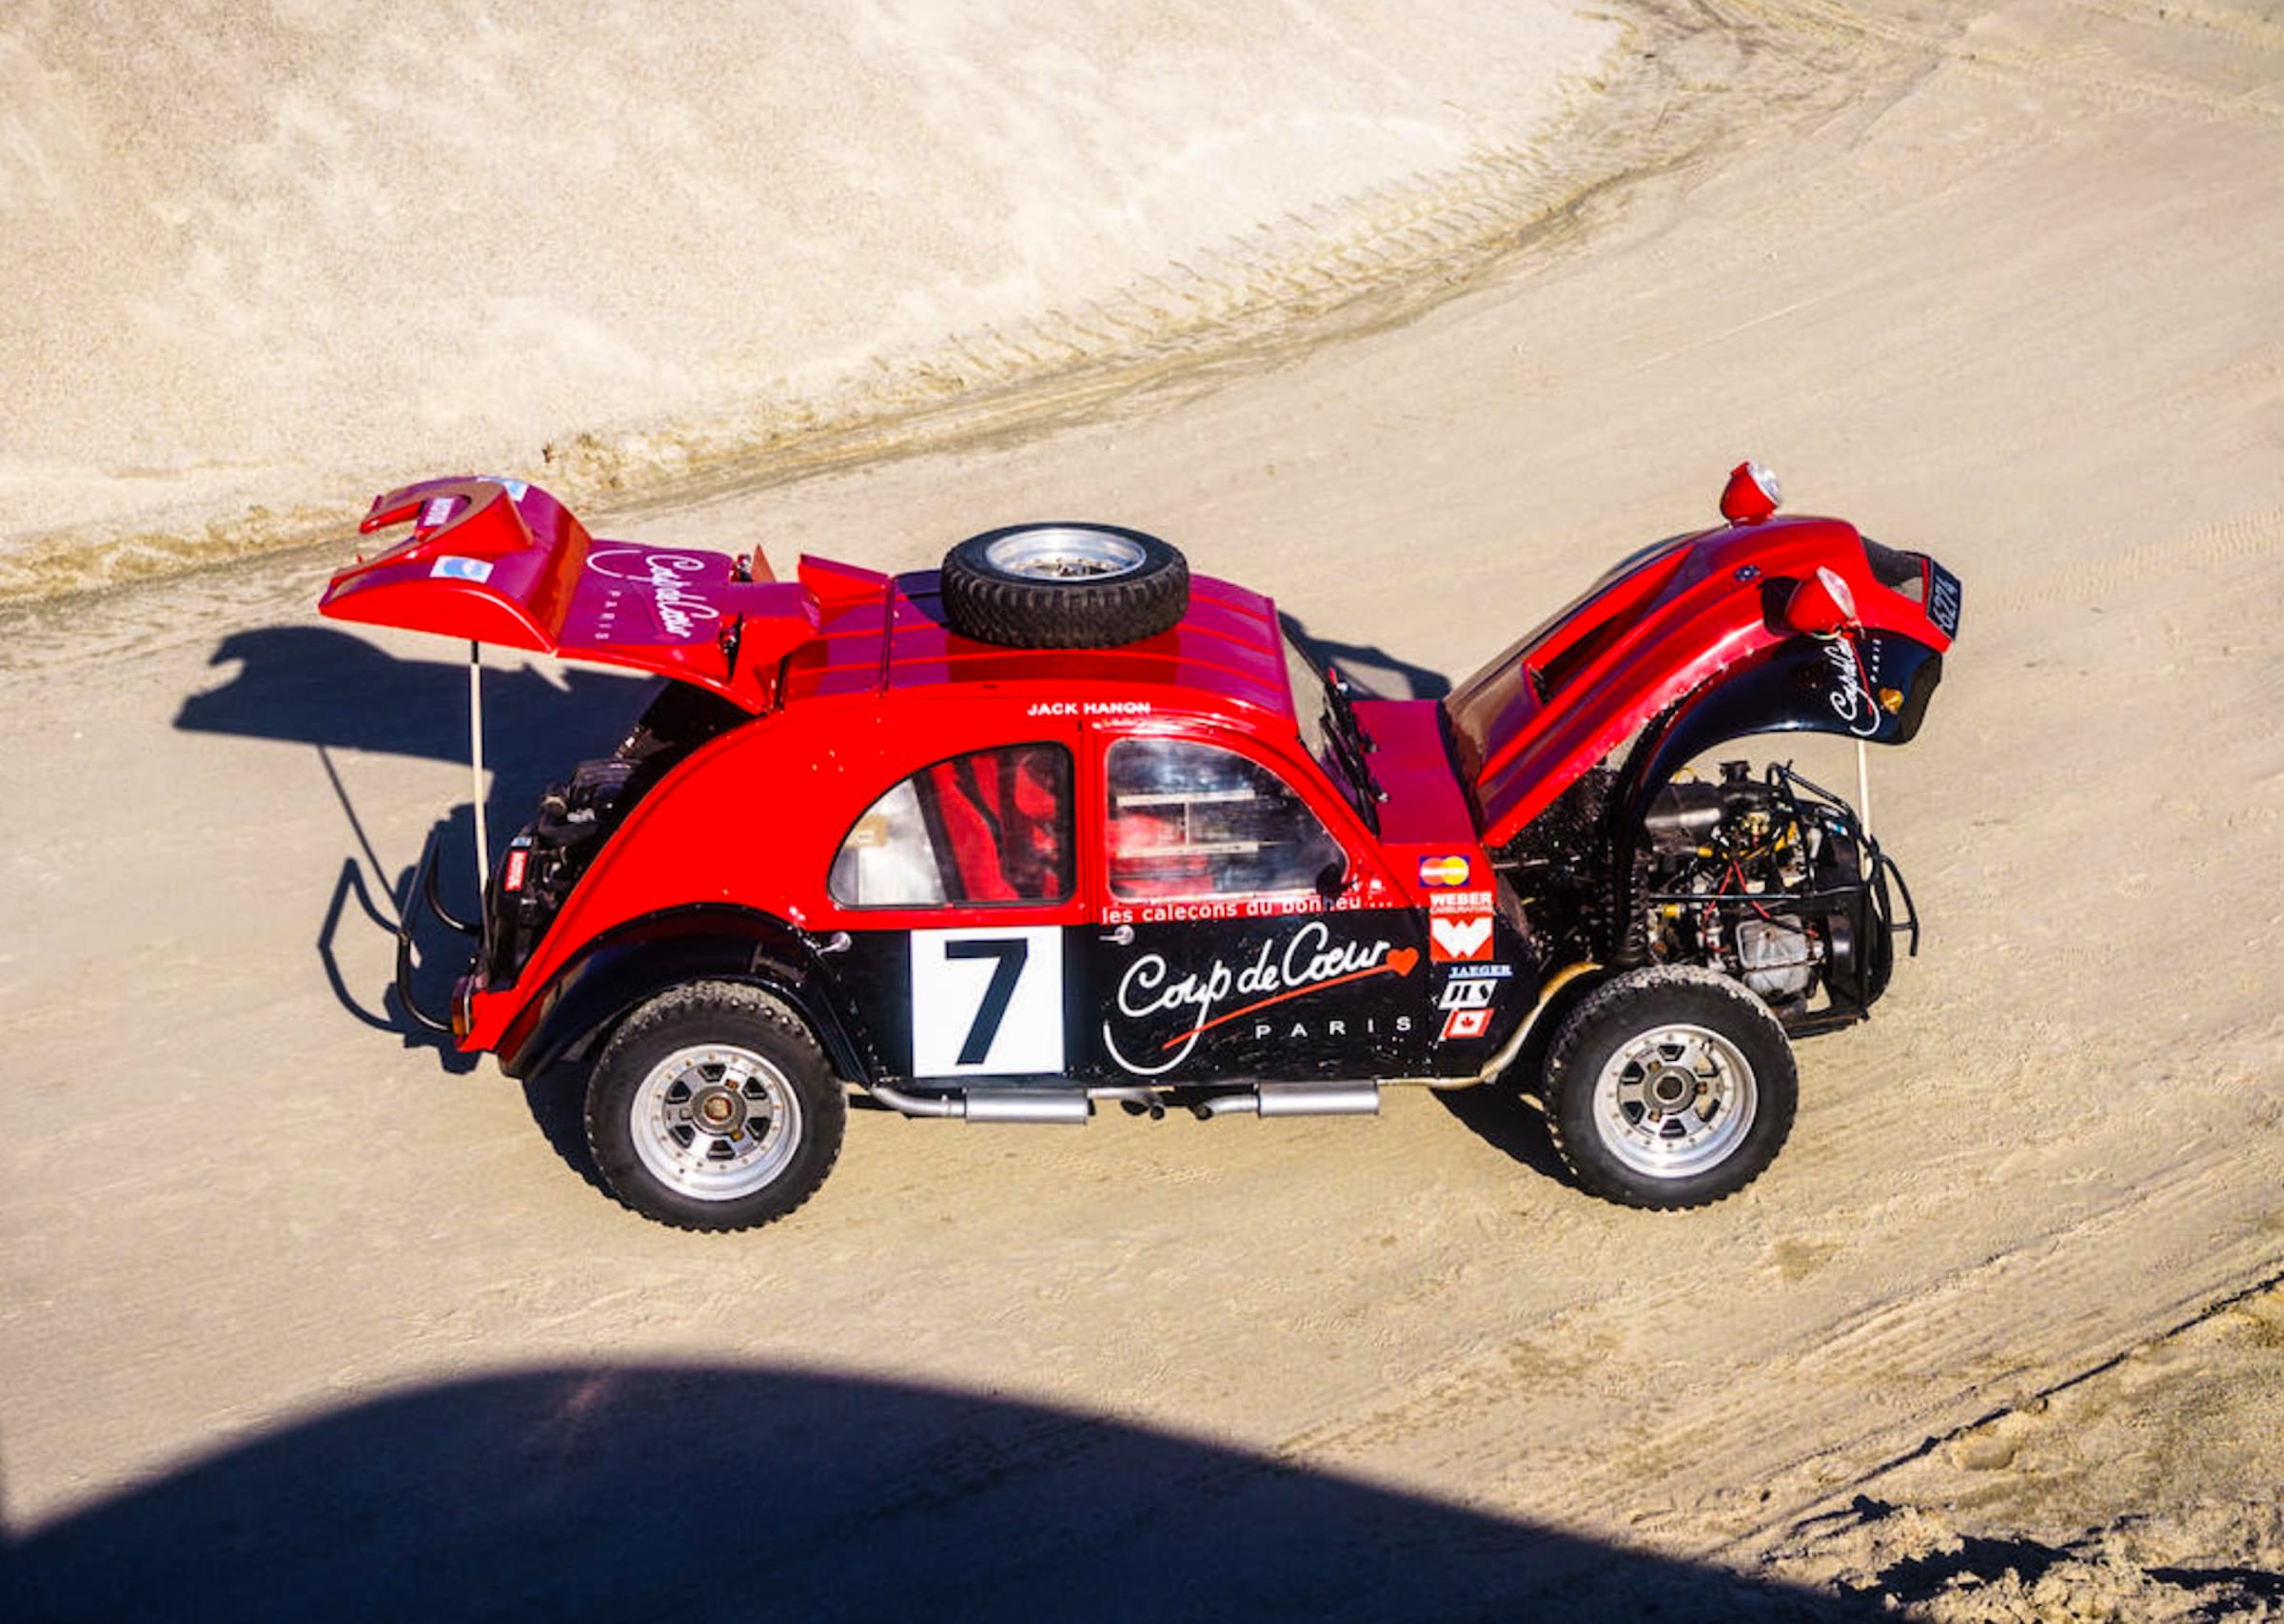 A One-Off Citroën 2CV Twin-Engined 4x4 Desert Racer From The 1980s